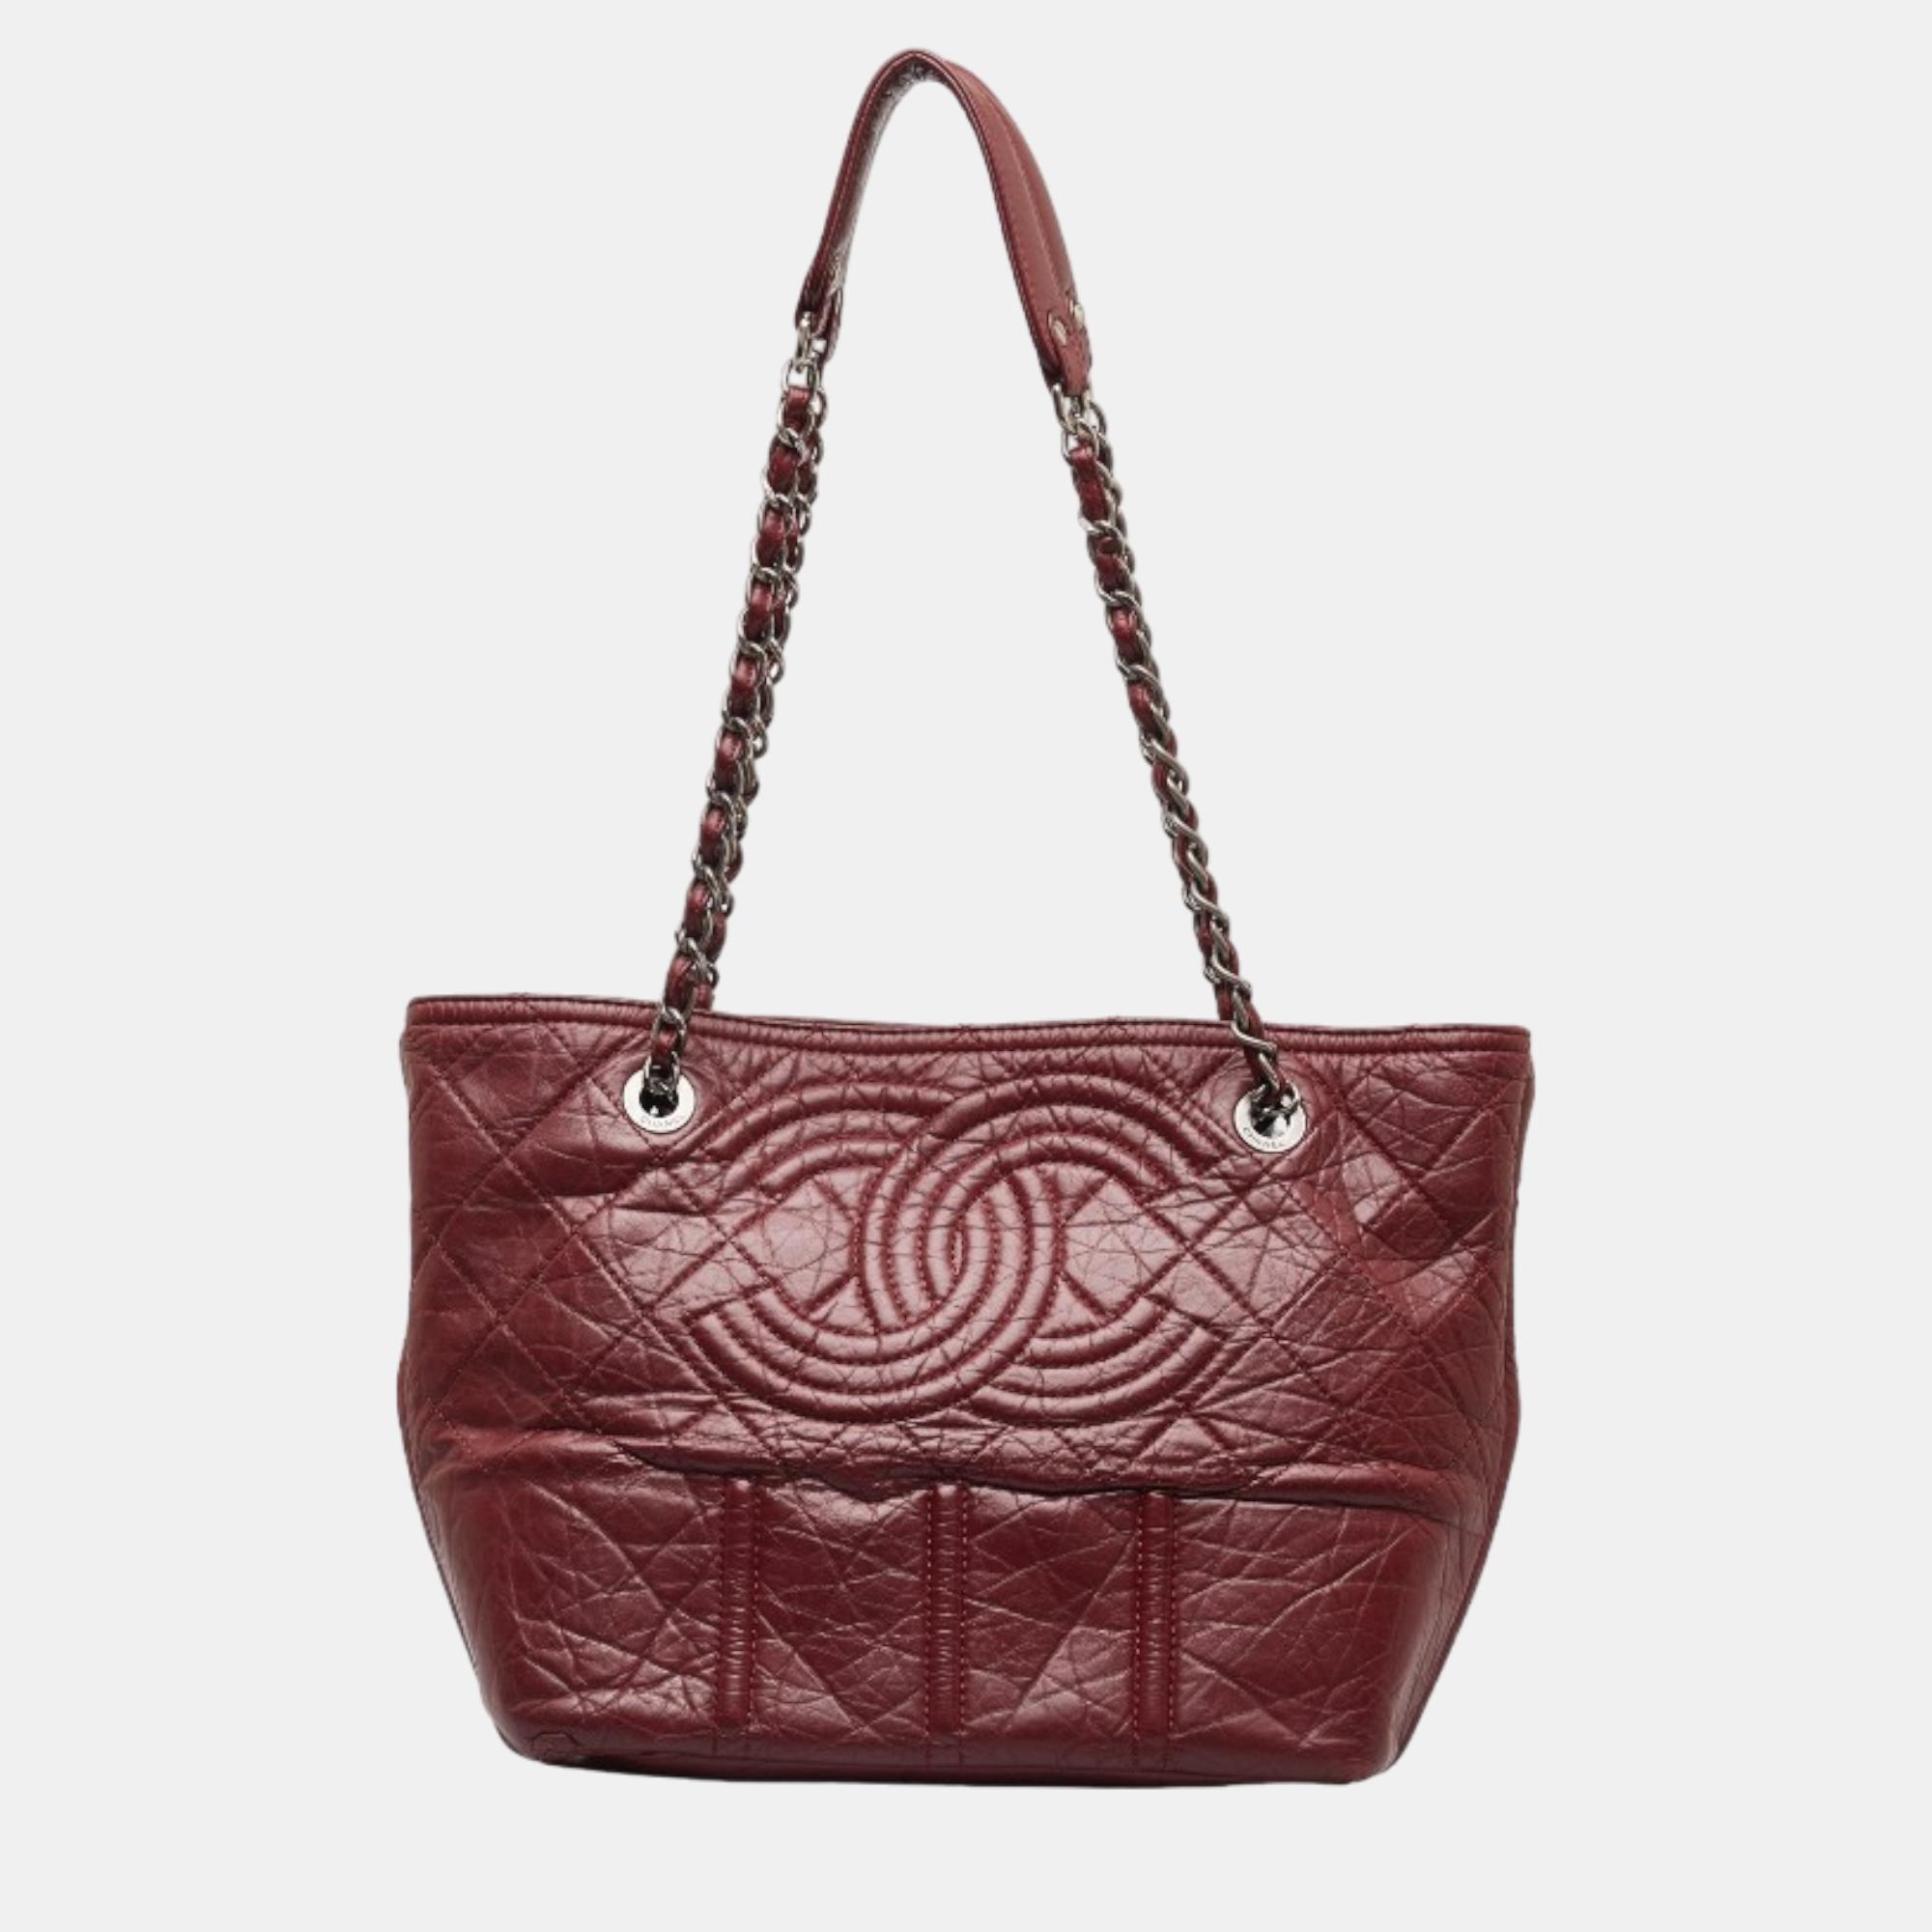 

Chanel Red Leather Aged Lambskin Shopping Tote